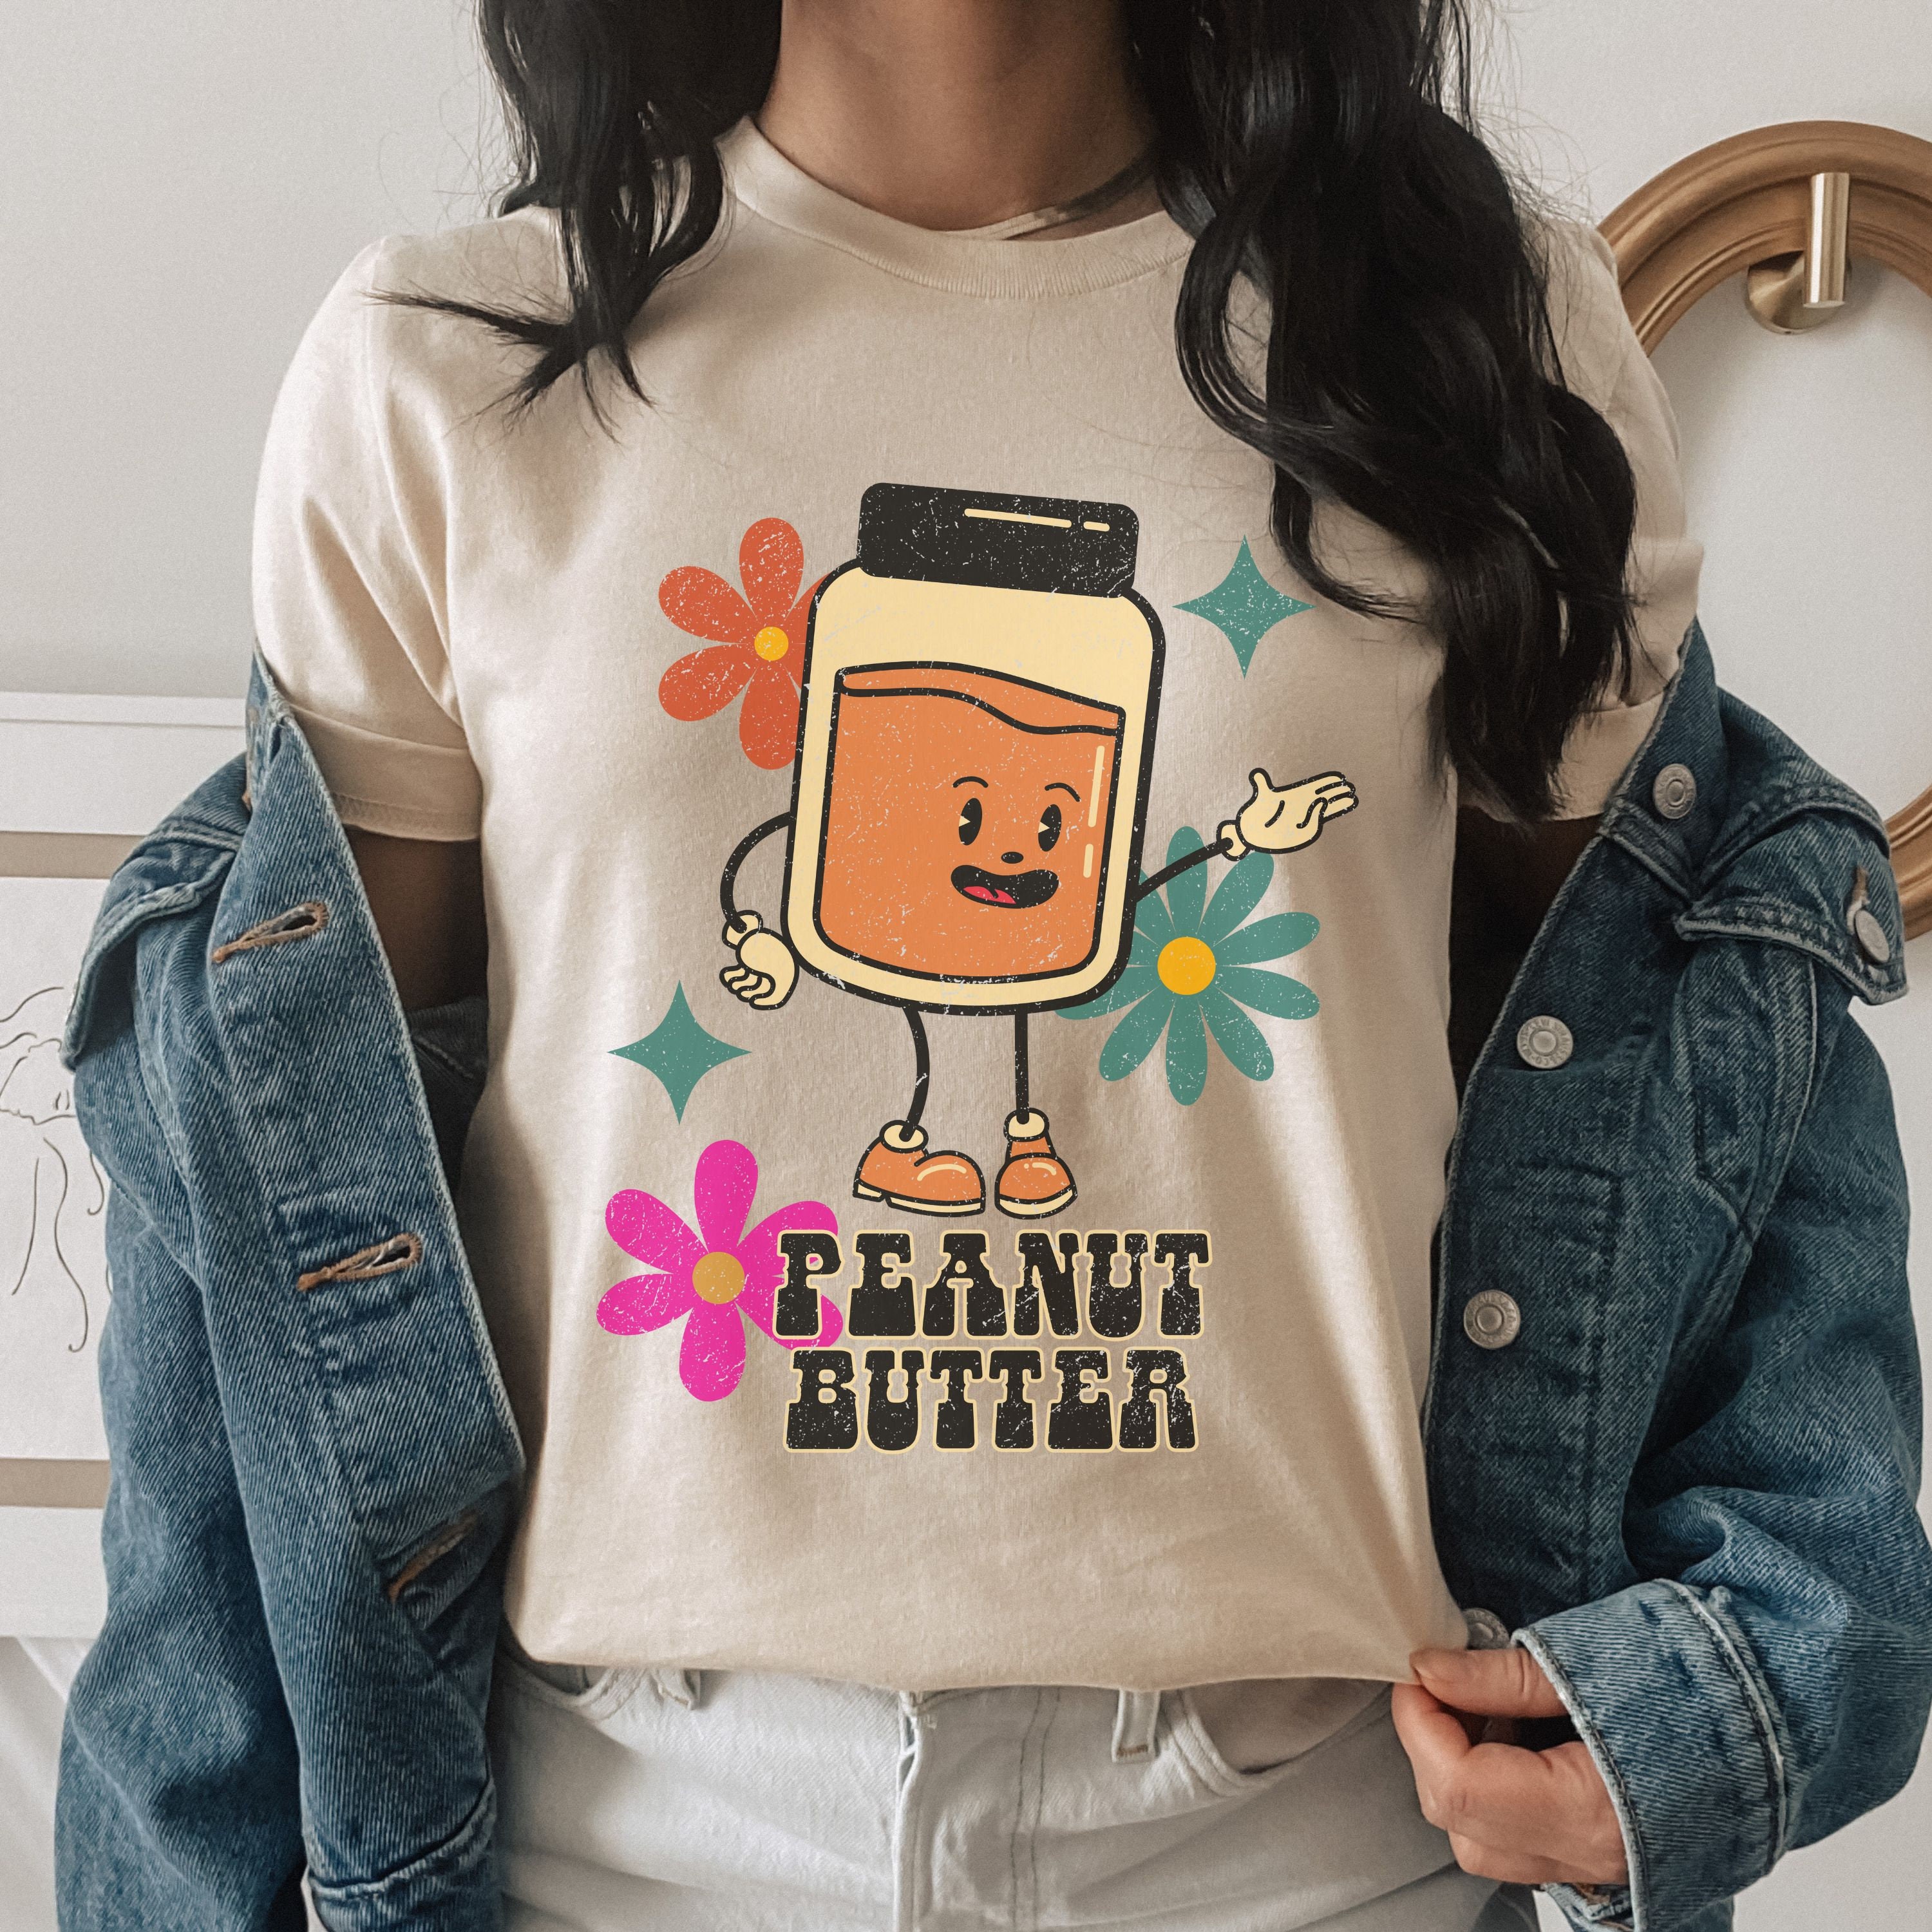 Discover Peanut Butter and Jelly Shirts, Best Friends Shirts Shirts, BFF Shirts, Funny Halloween Shirts, Family Shirts, Bride and Bridesmaid shirts